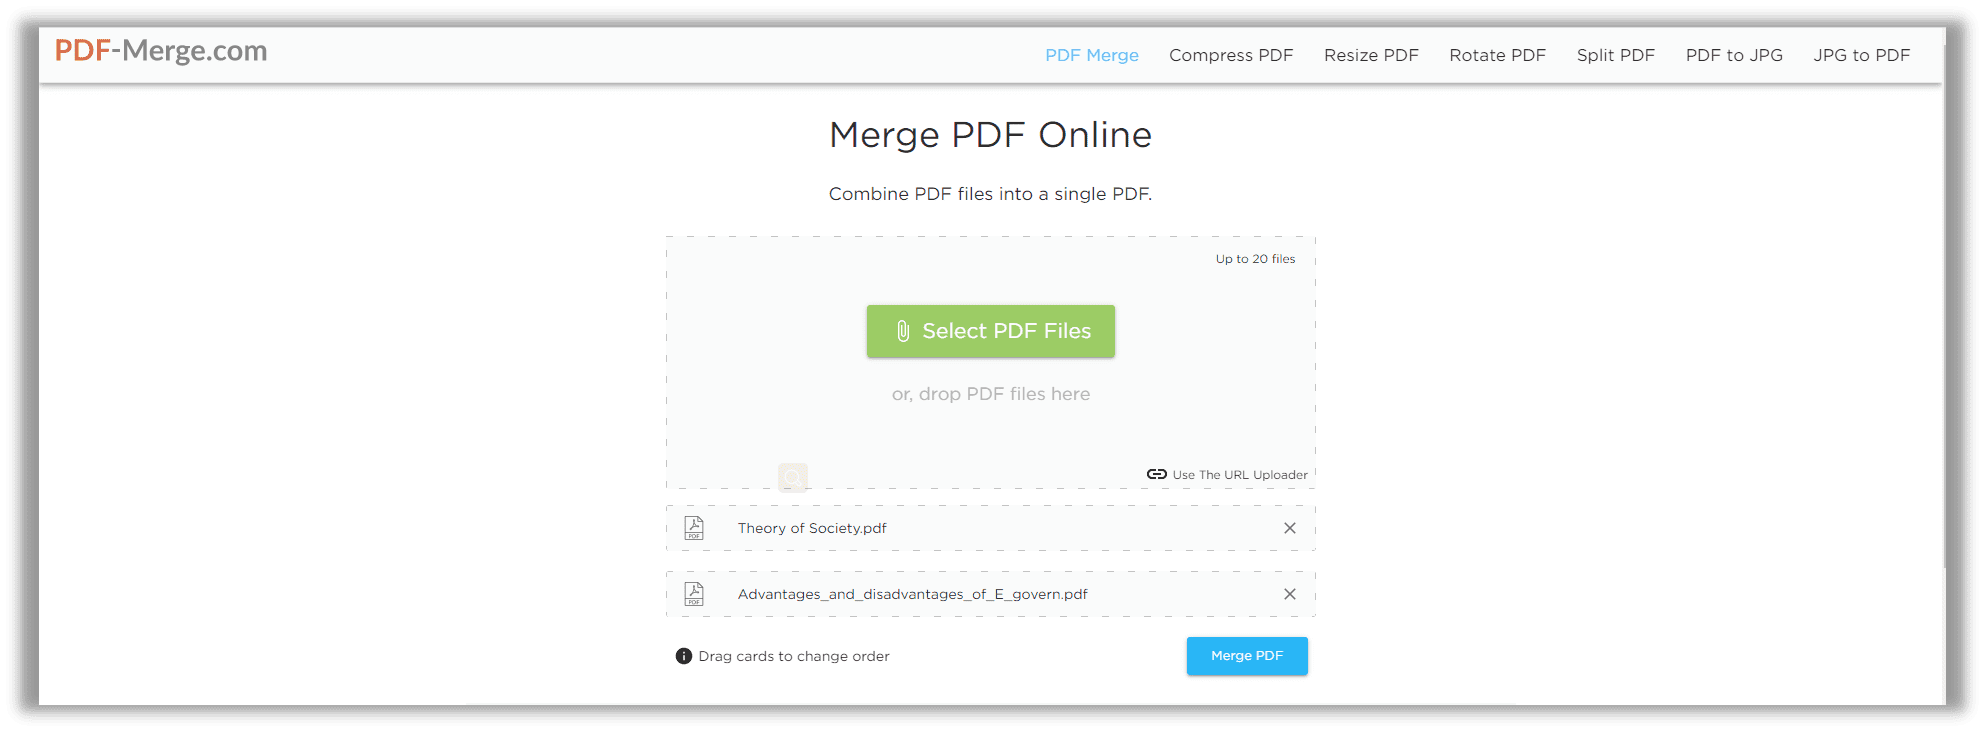 How to combine multiple PDFs into one online with PDFMerge